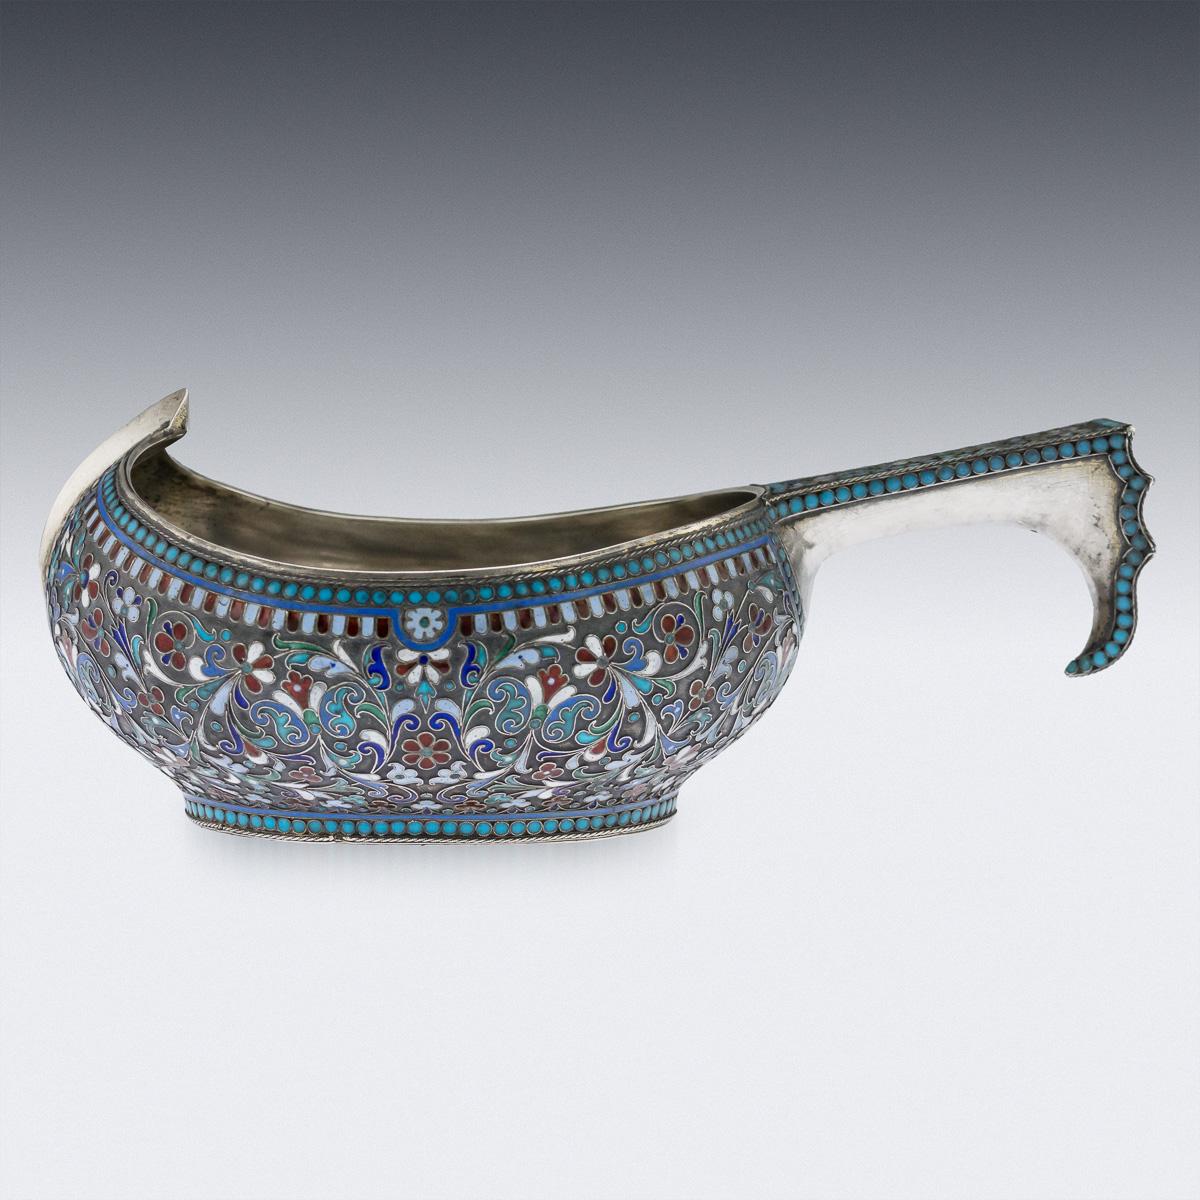 Antique Russian large solid silver and enamel Kovsh, Victor Akimov, circa 1890.

Antique late 19th century imperial Russian large solid silver and cloisonné' enamel kovsh, with raised prow and hook handle, beautifully decorated with traditional